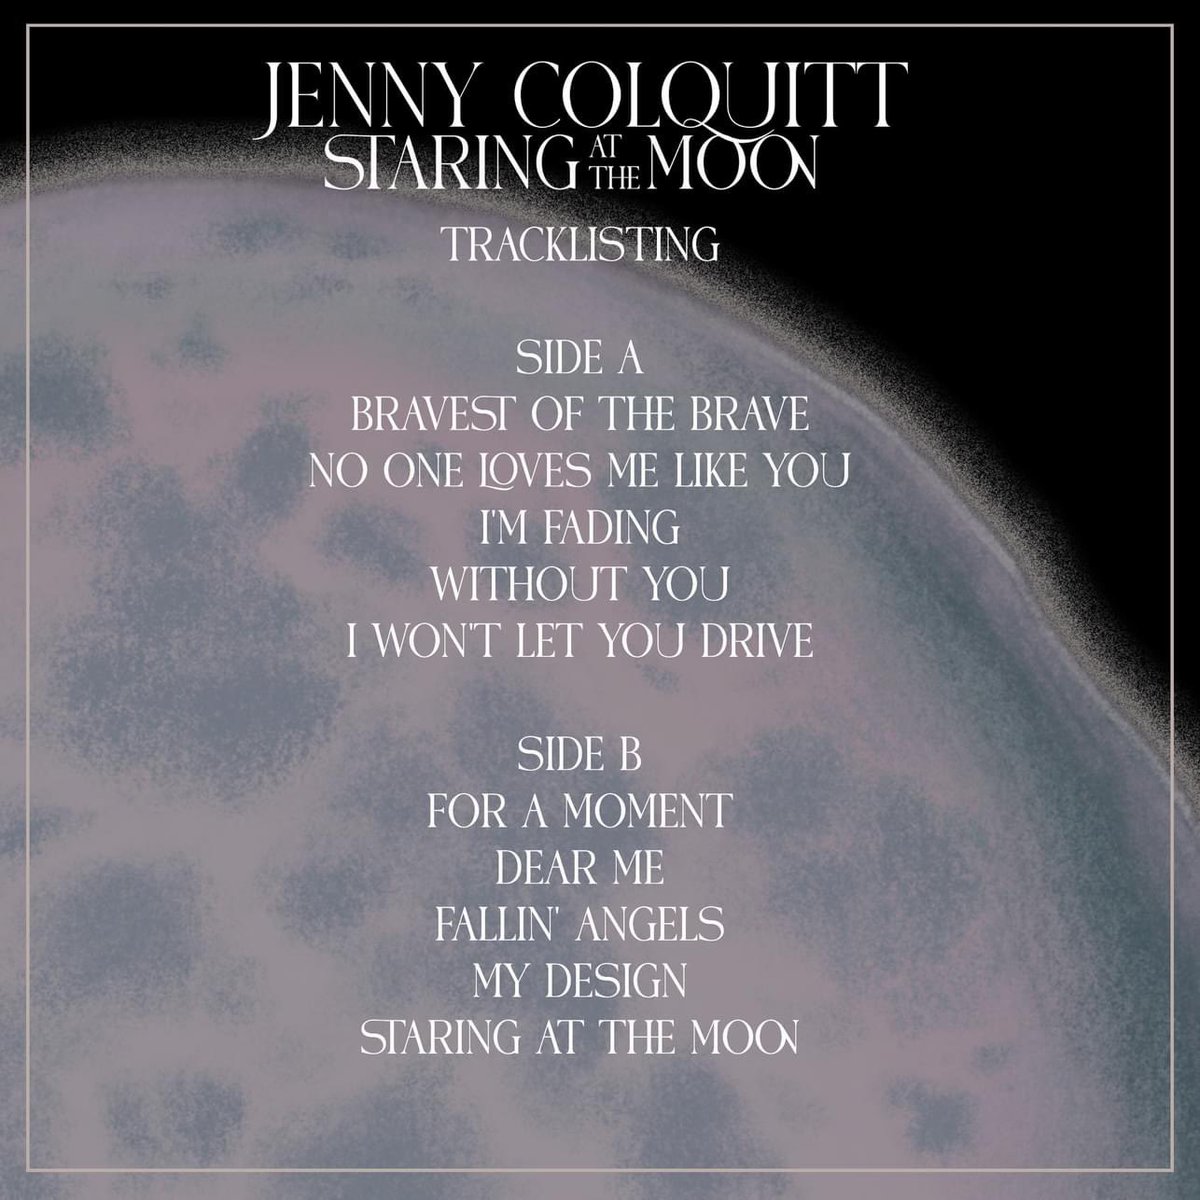 Hello all! I'm so excited to let you know that my new album Staring at the Moon will be with you on the 3rd May and is available for pre-order on Bandcamp FROM NOW! I'm also super excited to be able to reveal the tracklisting to you :) jennycolquitt.bandcamp.com/album/staring-…